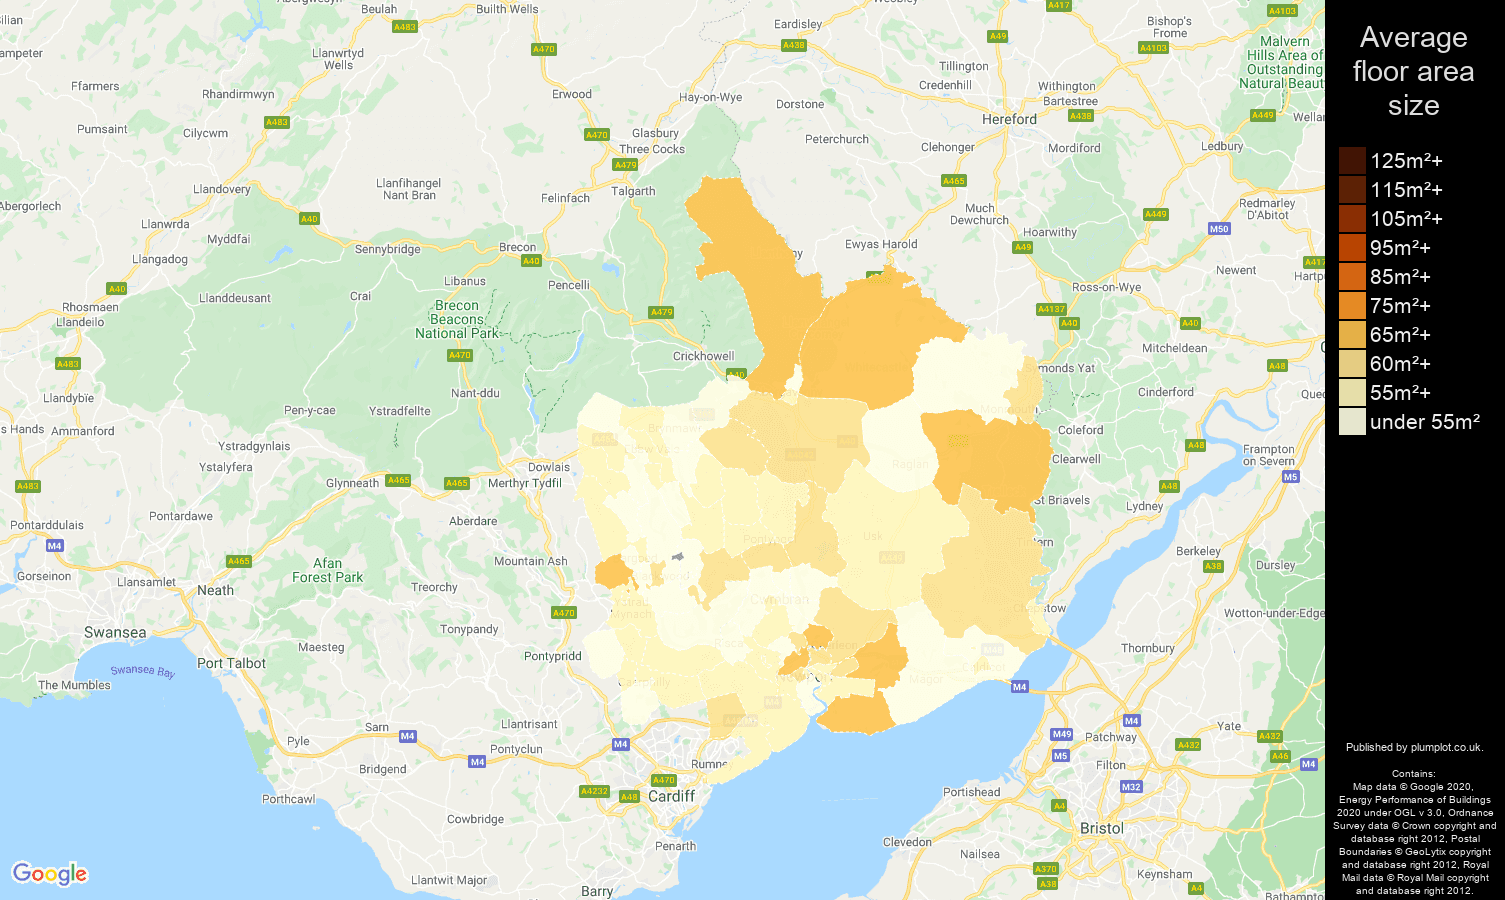 Gwent map of average floor area size of flats